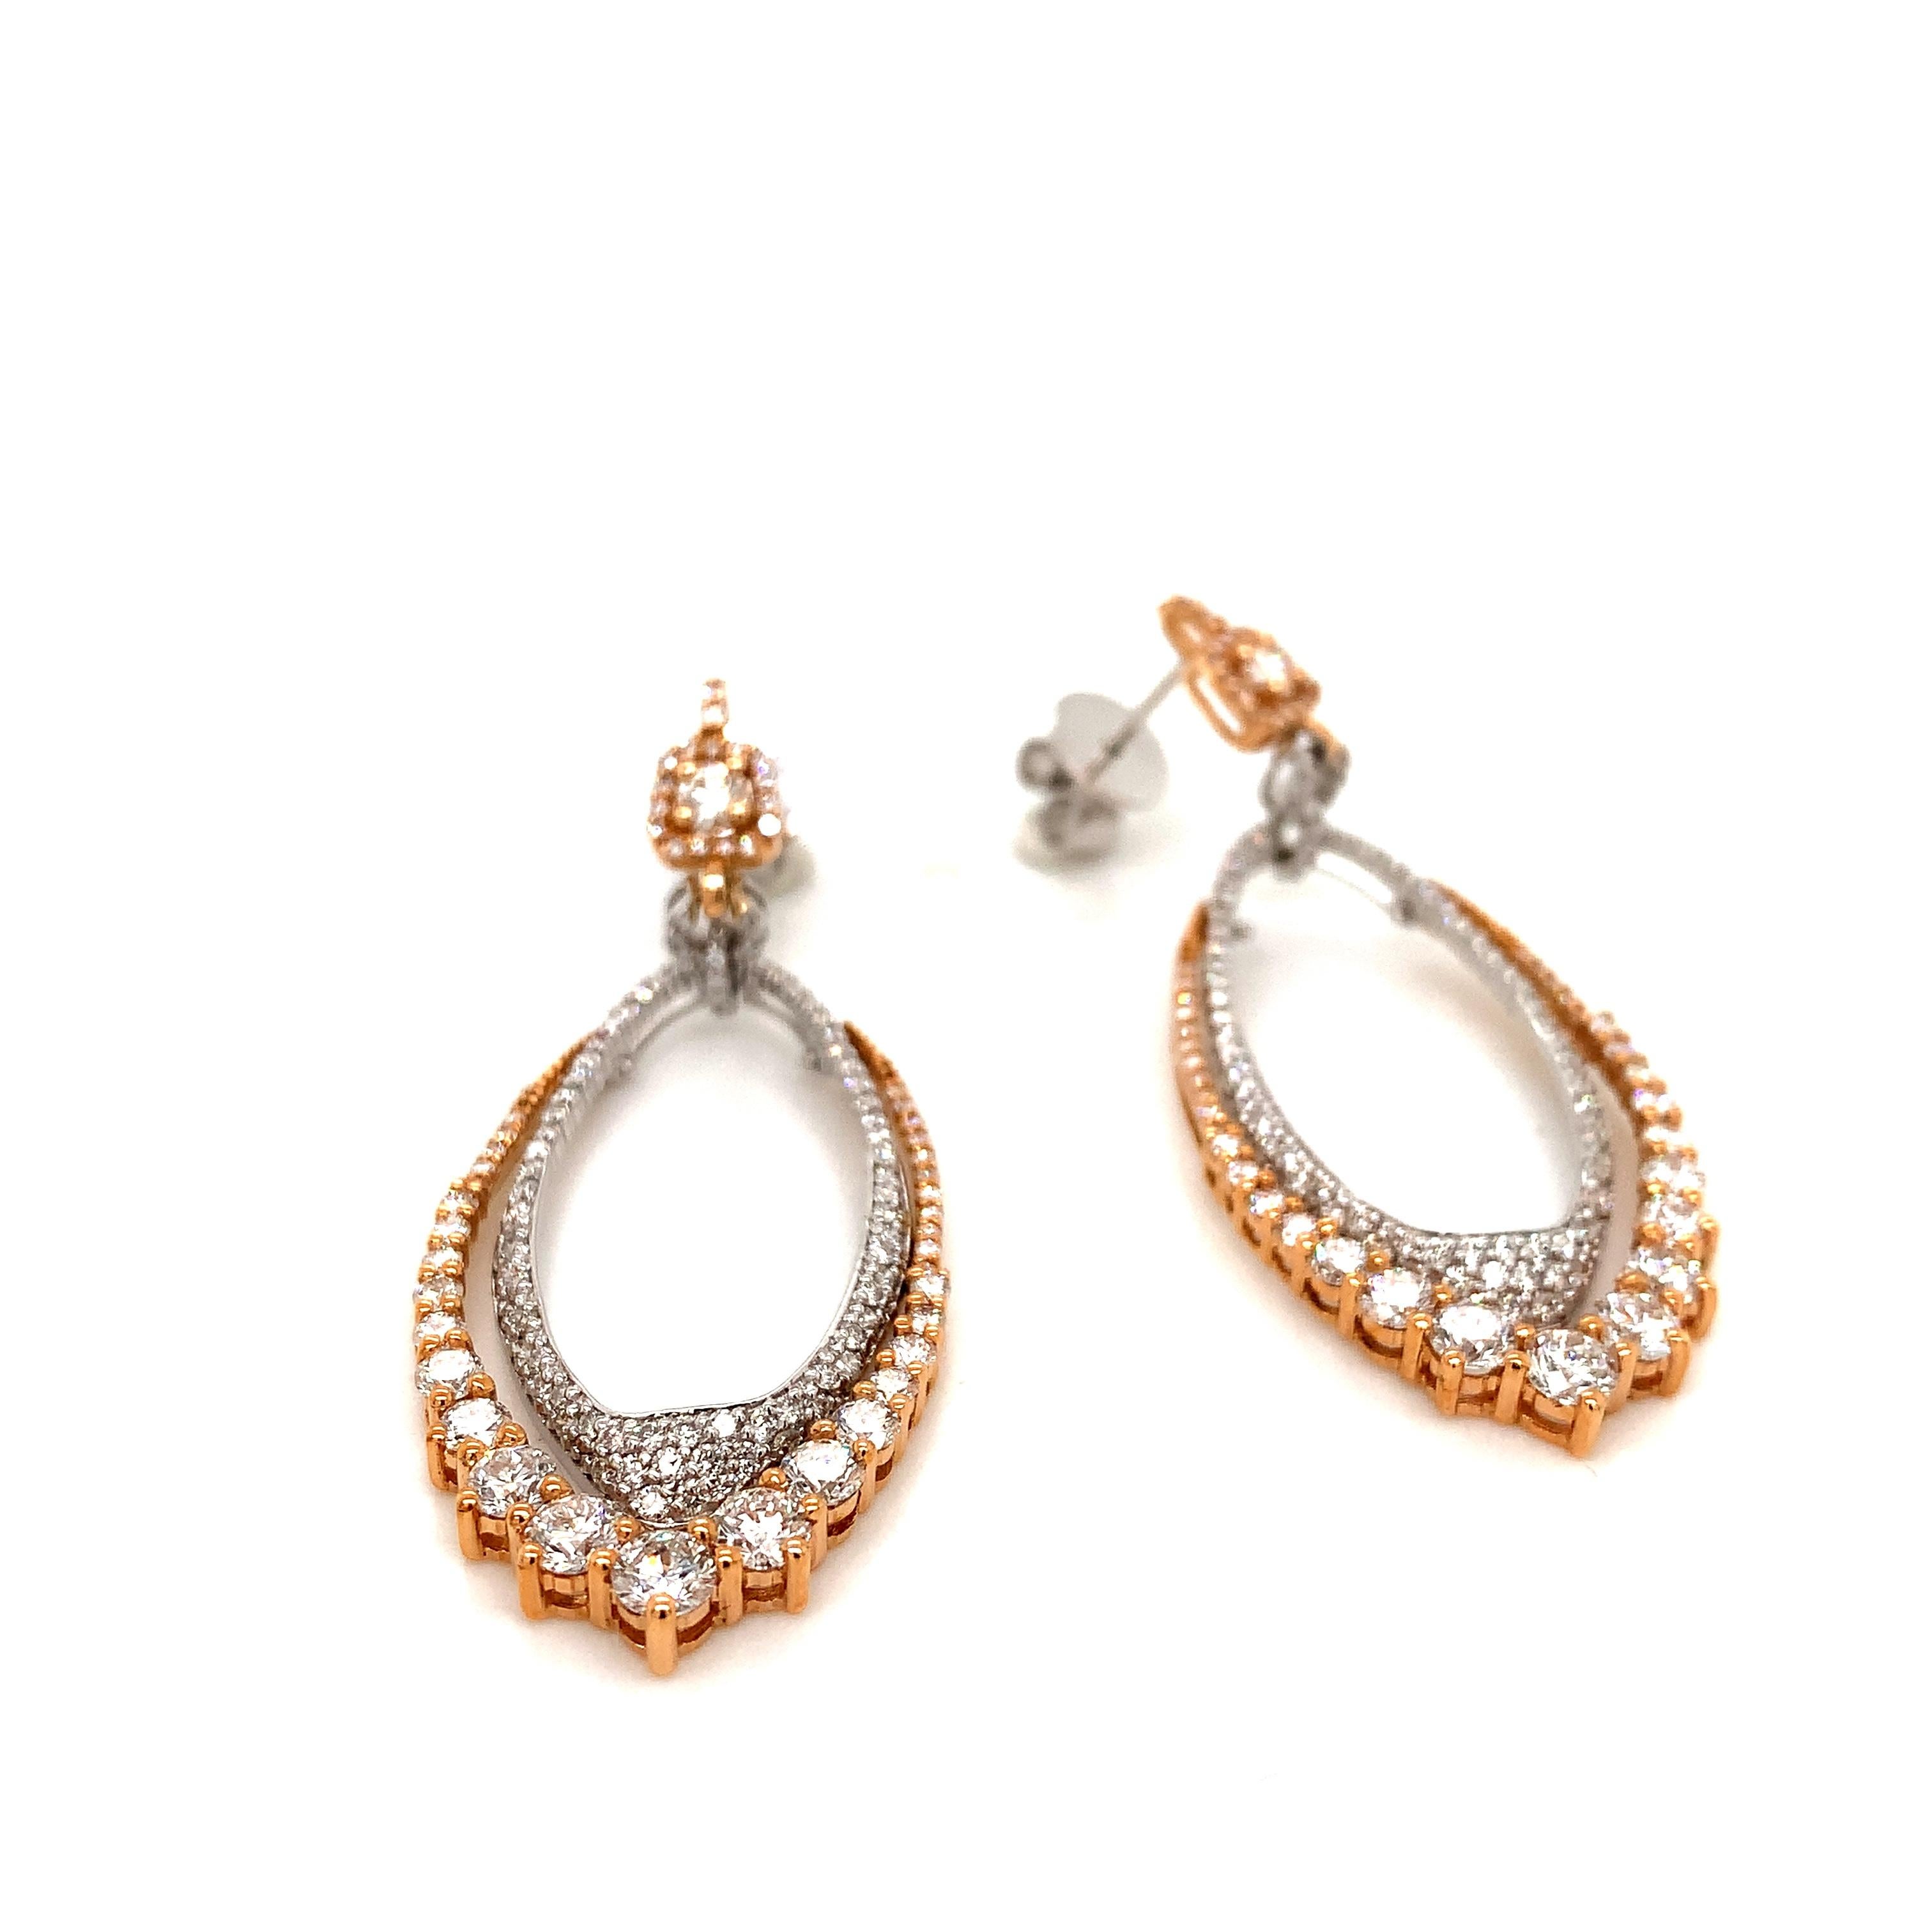 OWN Your Story 18K White and Rose Gold Graduated Diamond Studded Dual Pendulum Drop Earrings

OWN Your Story brings its 3 generations of family tradition and unparalleled experience with 18K gold, diamonds, and gemstones to create high-level jewelry